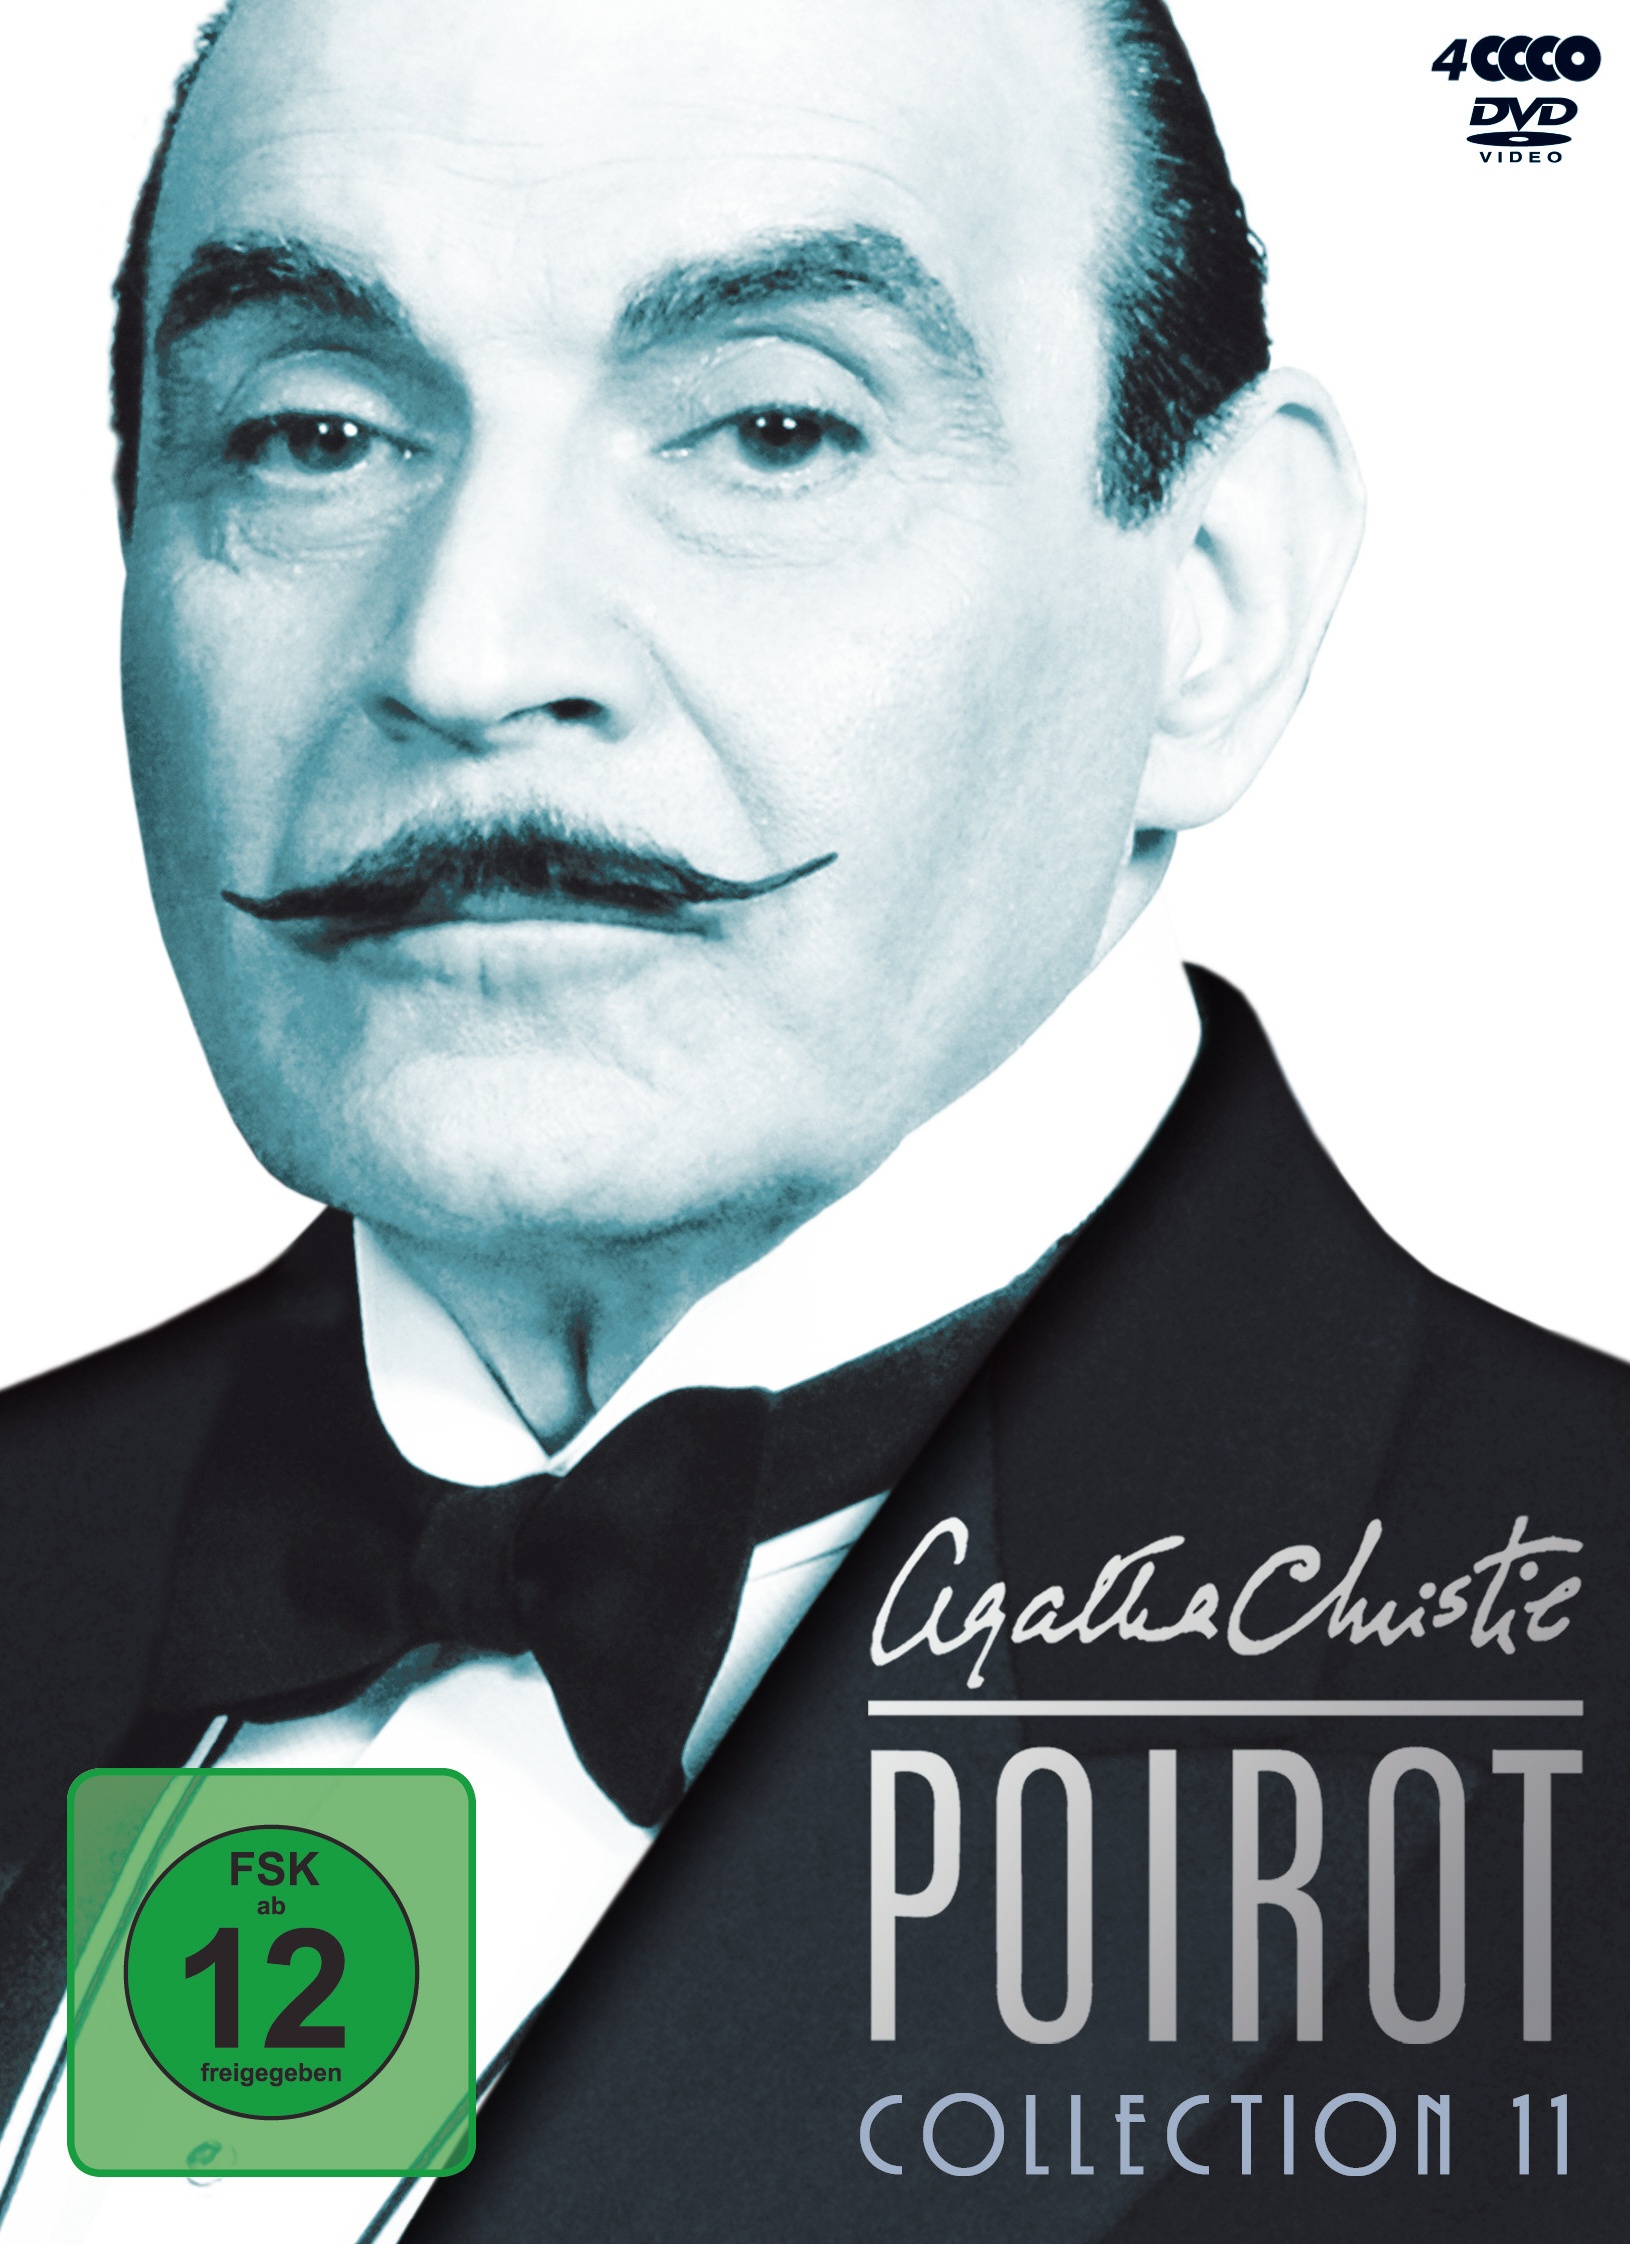 Poirot Collection 11 (DVD)